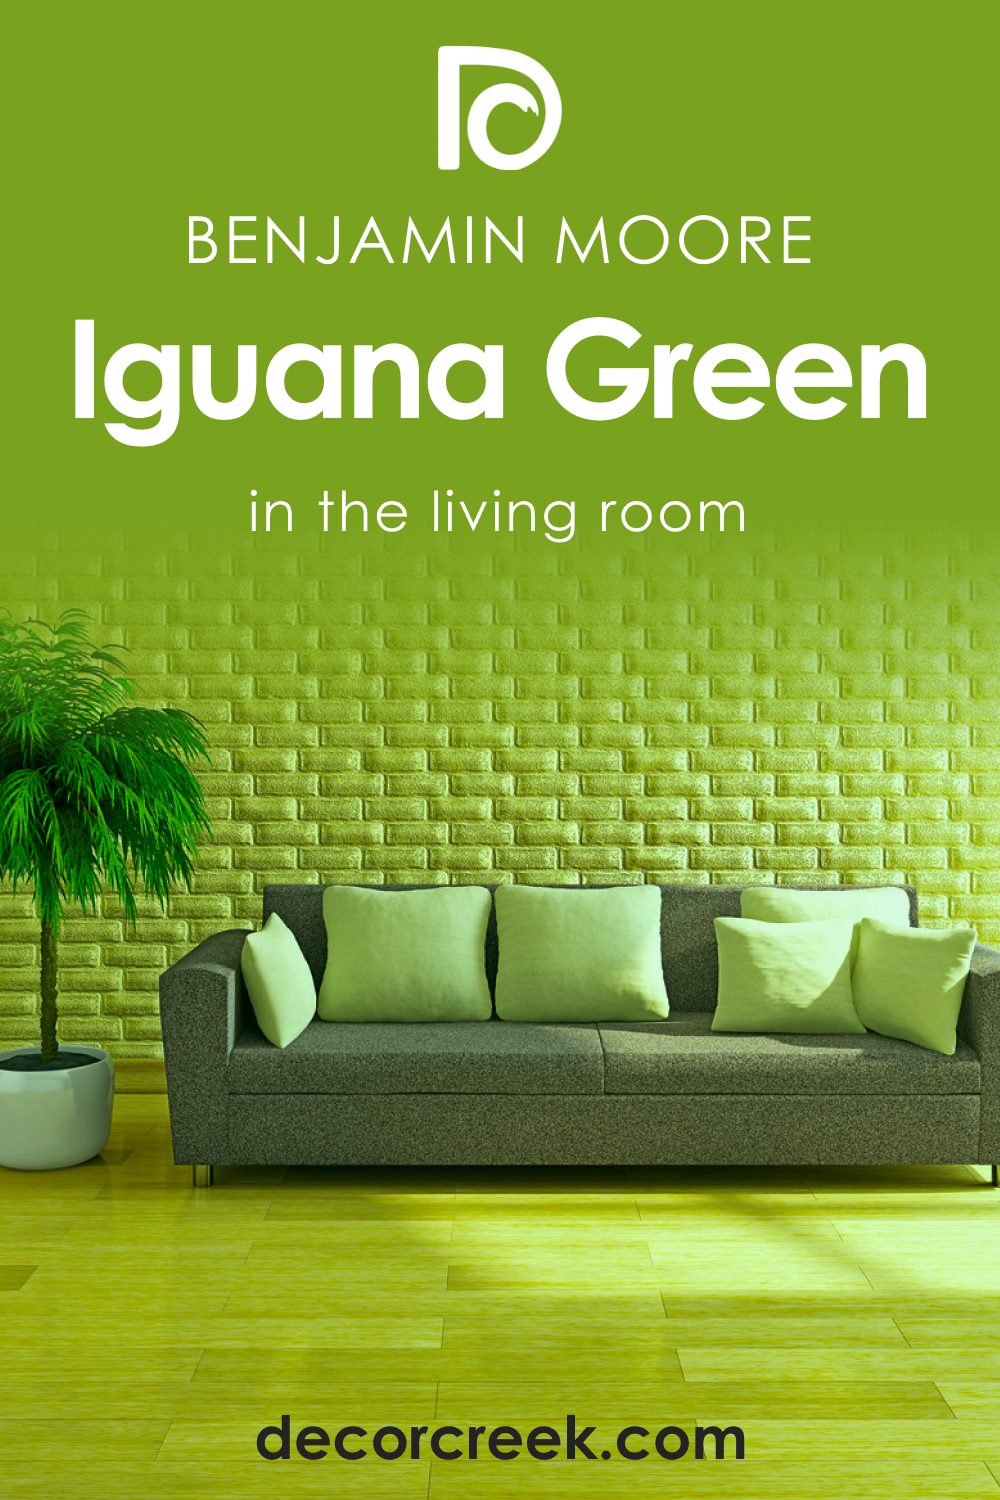 Iguana Green 2028-10 in the Living Room